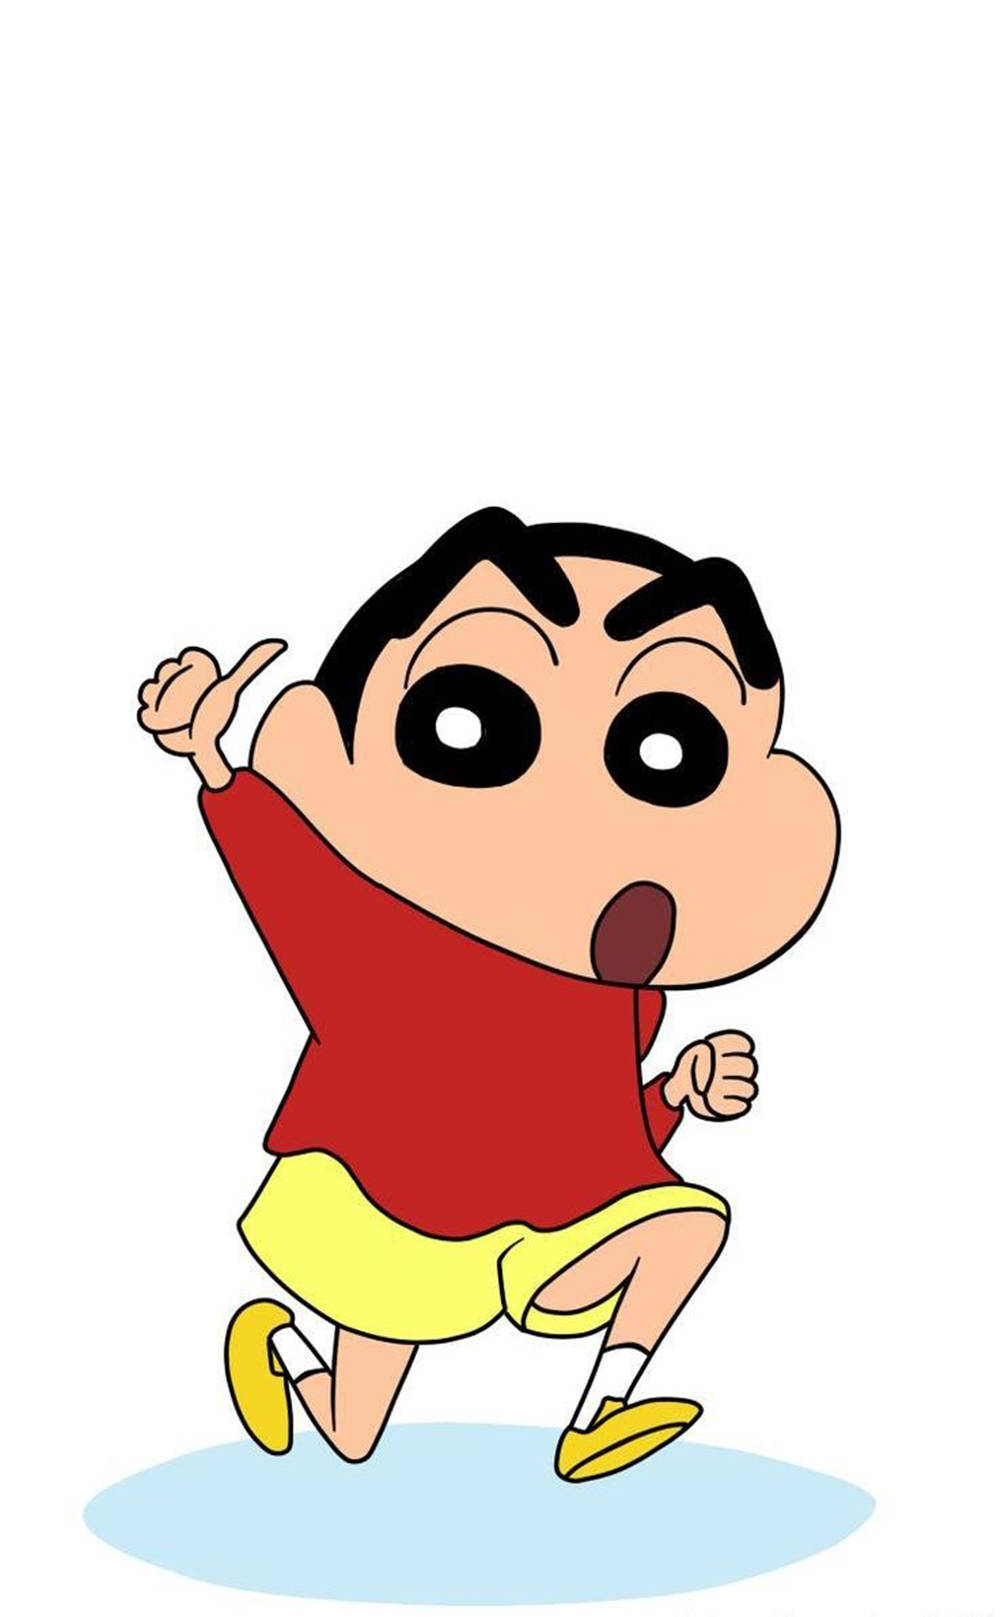 Japanese Character Shin Chan Iphone Background